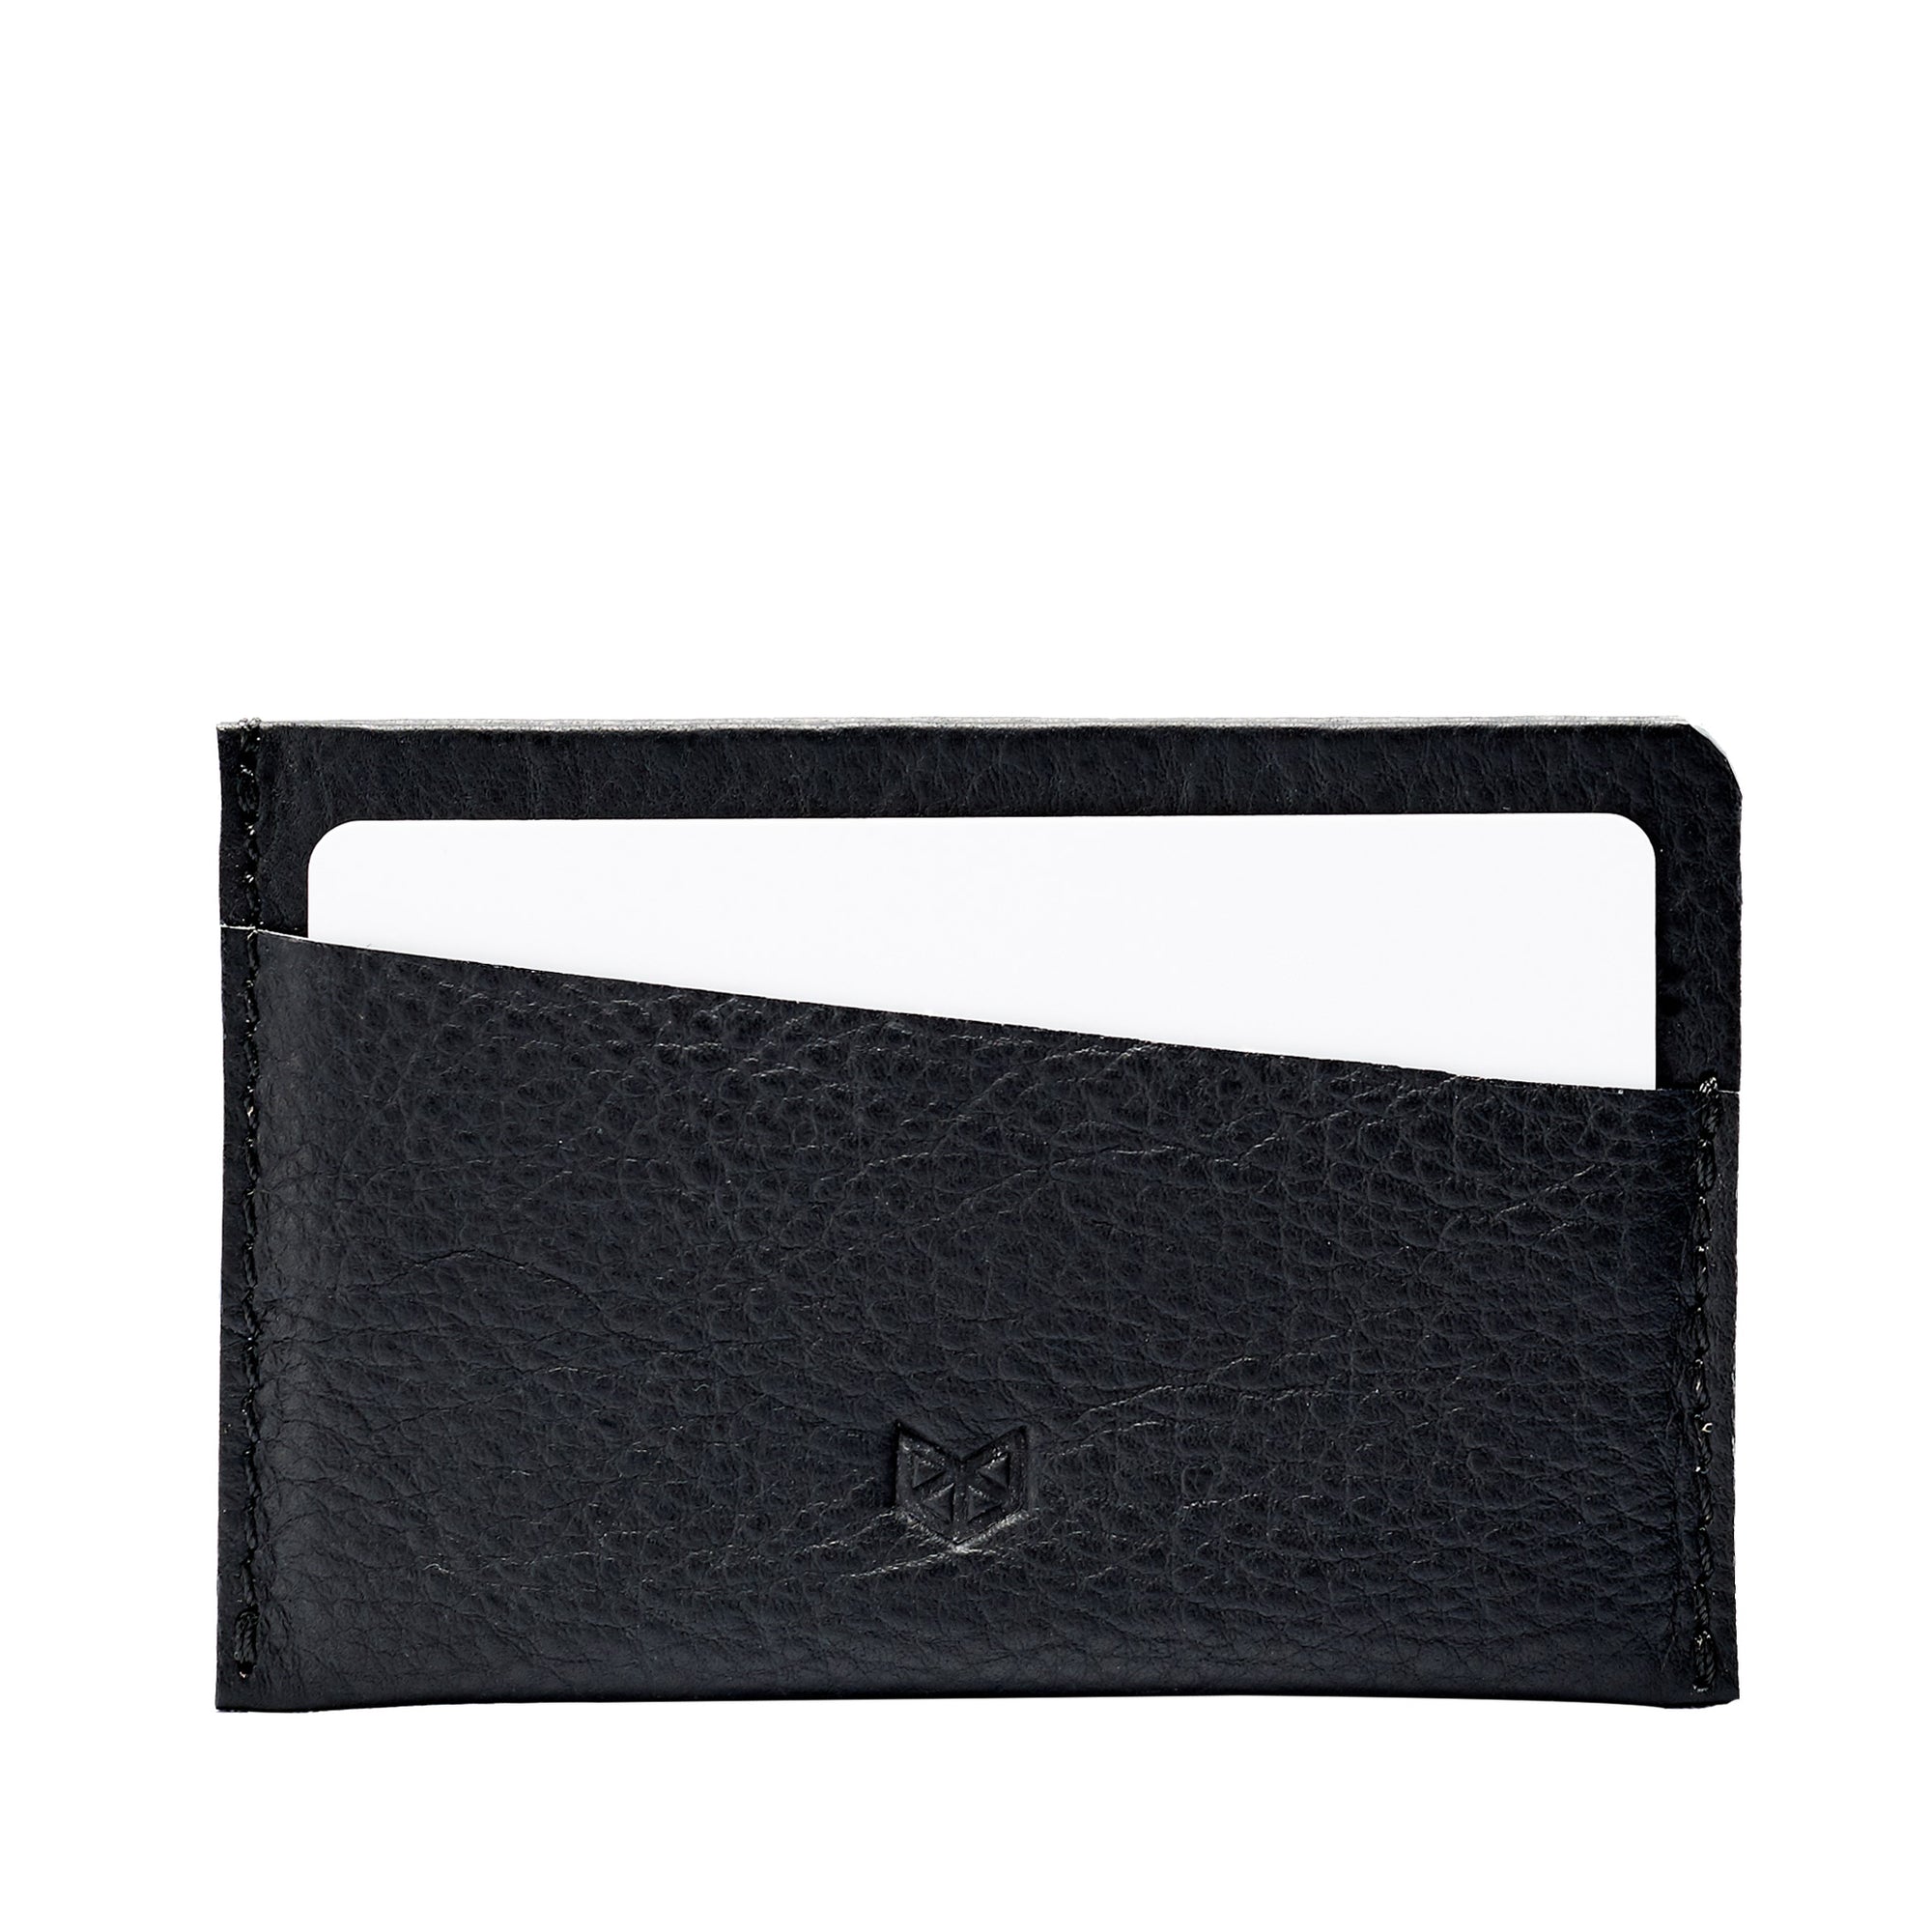 Leather black cards cardholder business cards sleeve. Perfect gift for men. Capra Leather